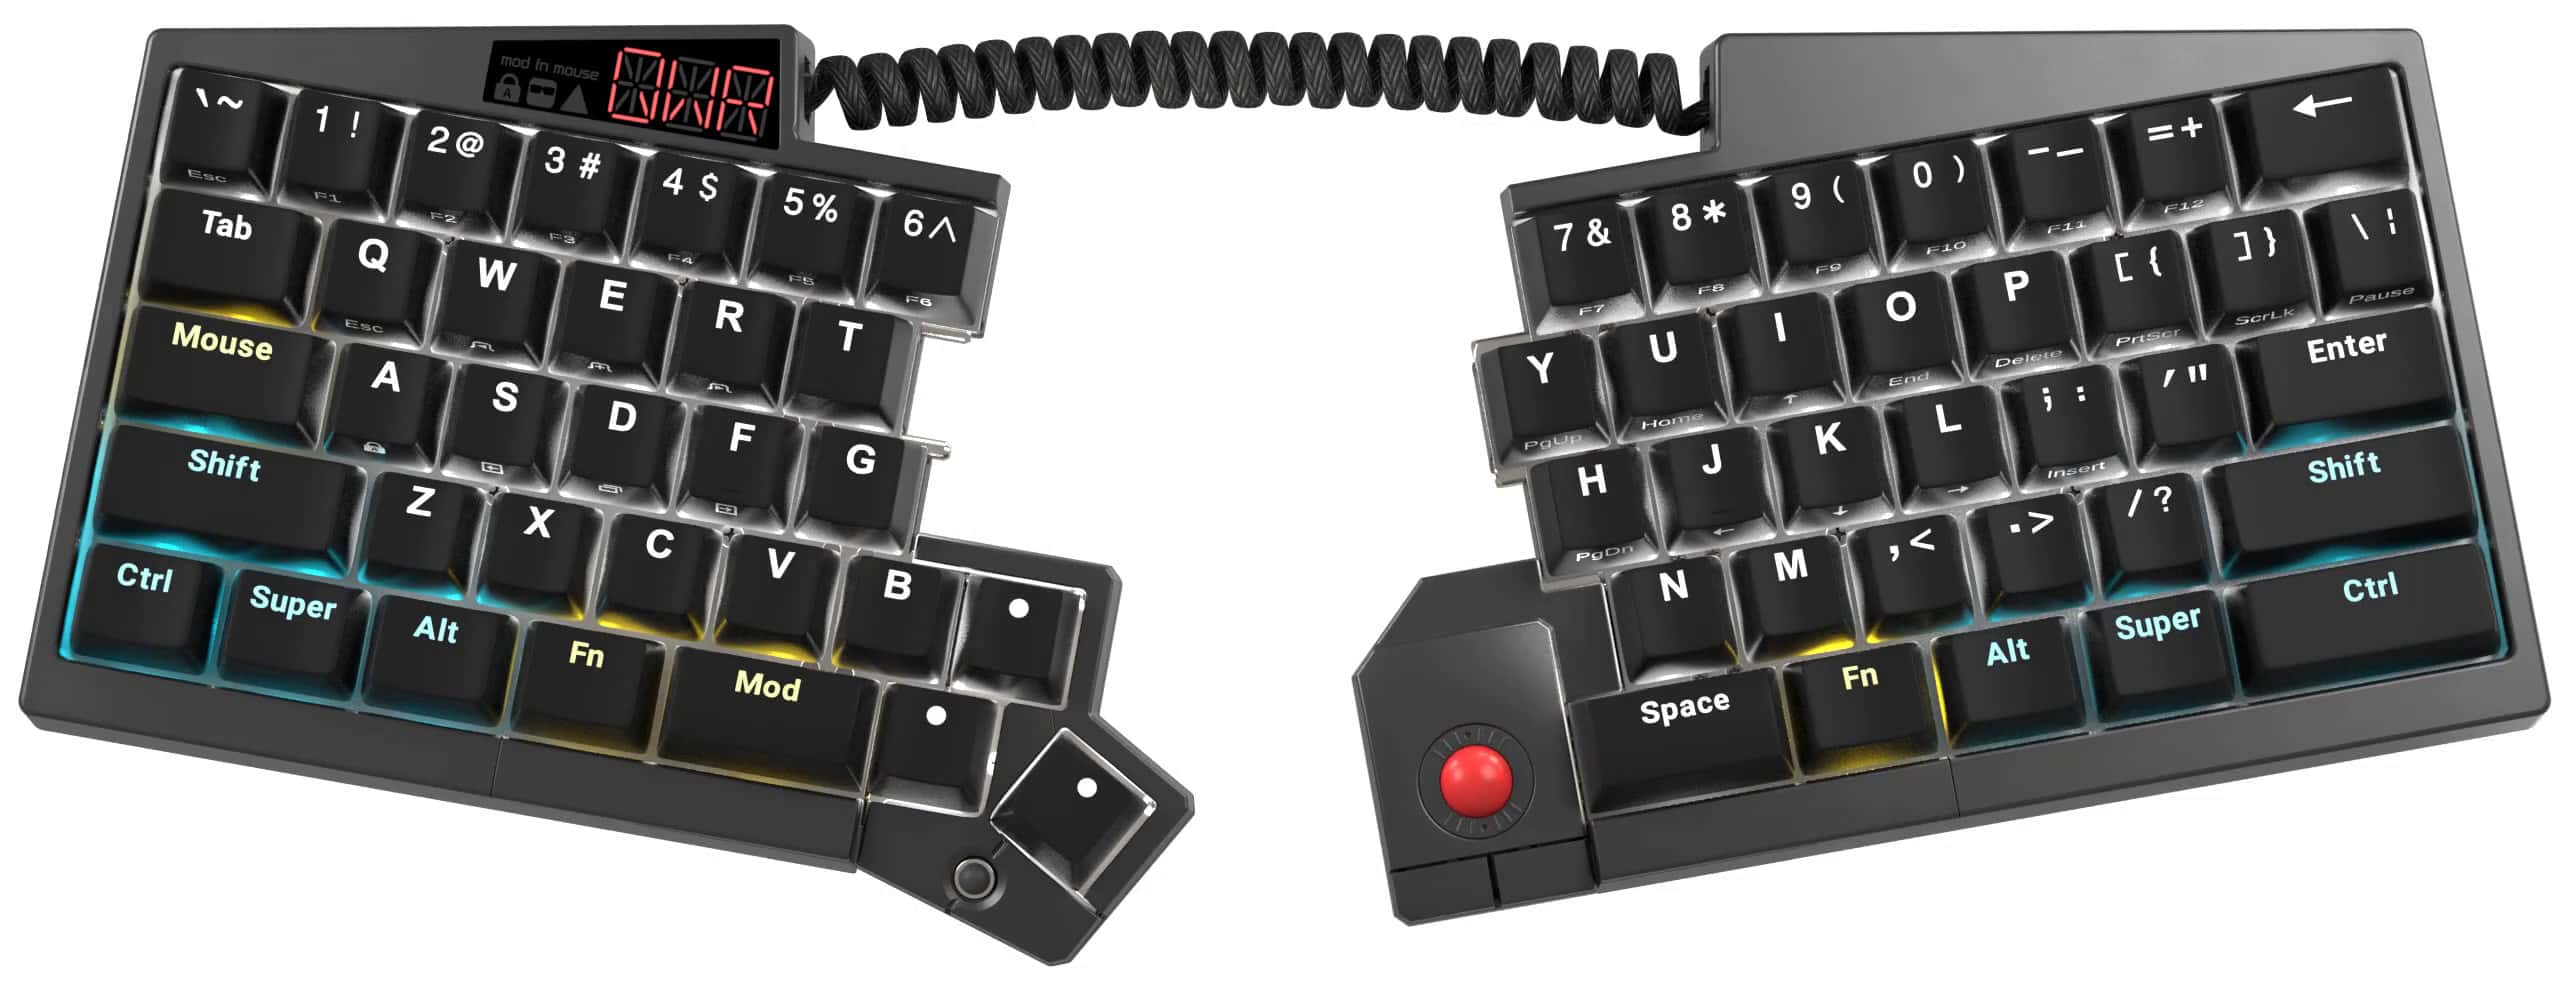 Ultimate Hacking Keyboard – The keyboard. For professionals.